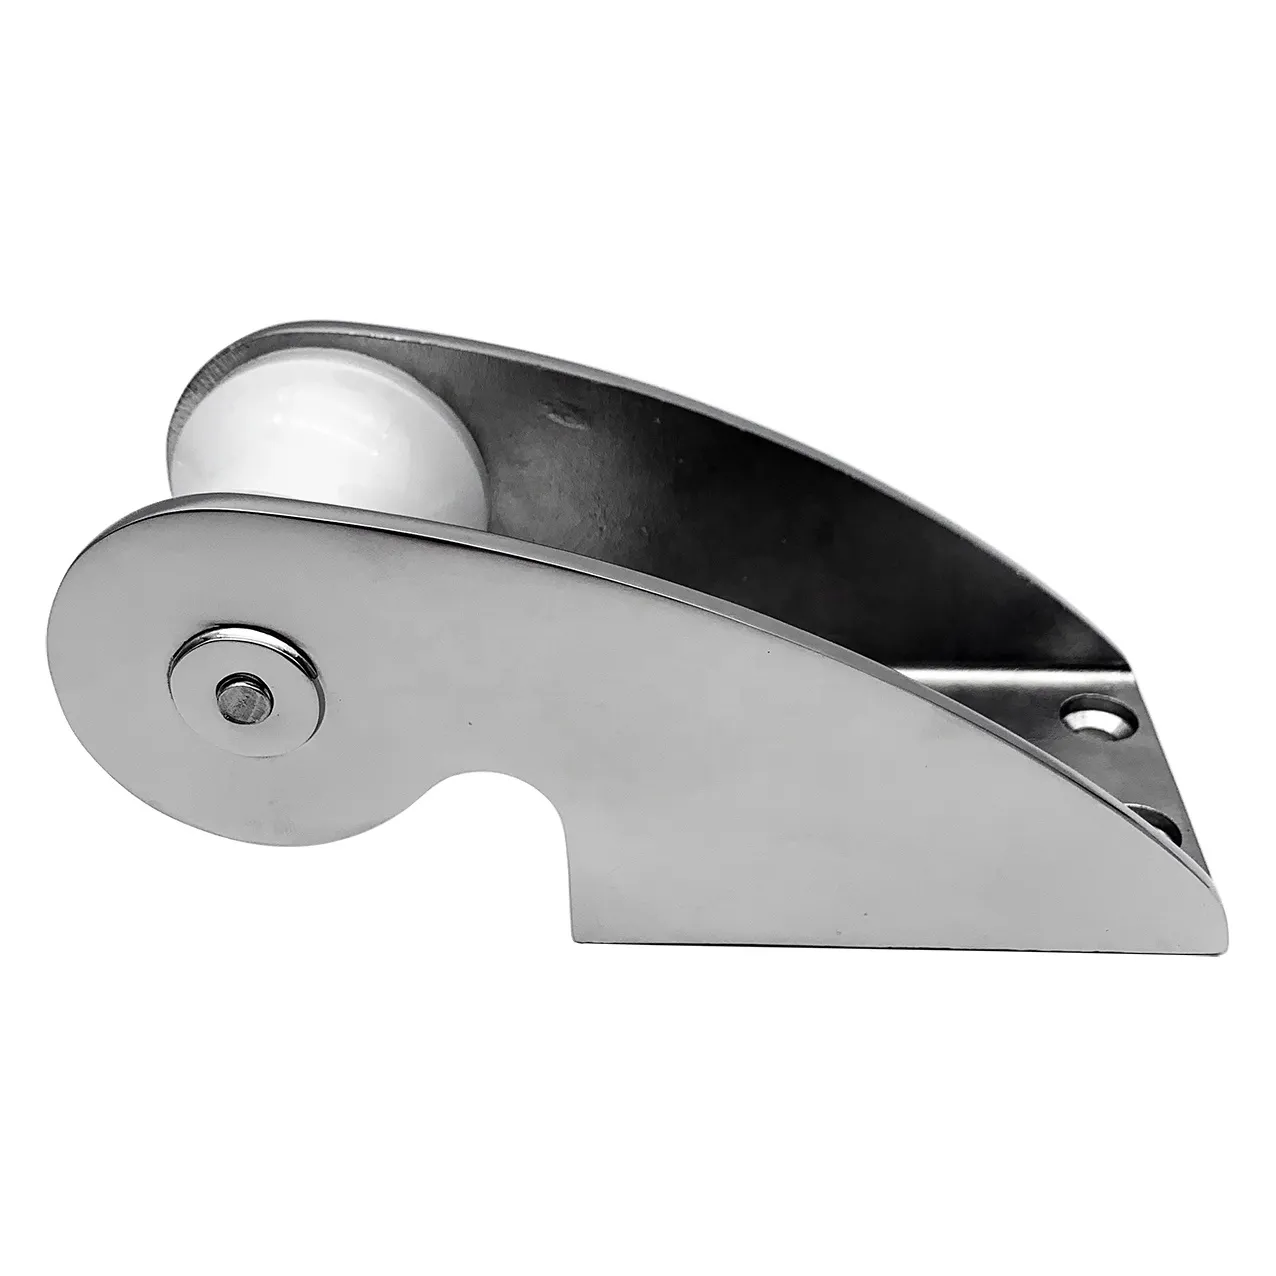 Replacement Bow Roller Marine Yacht Mirror Polished 316 Stainless Steel Boat Marine Hardware Anchor Roller